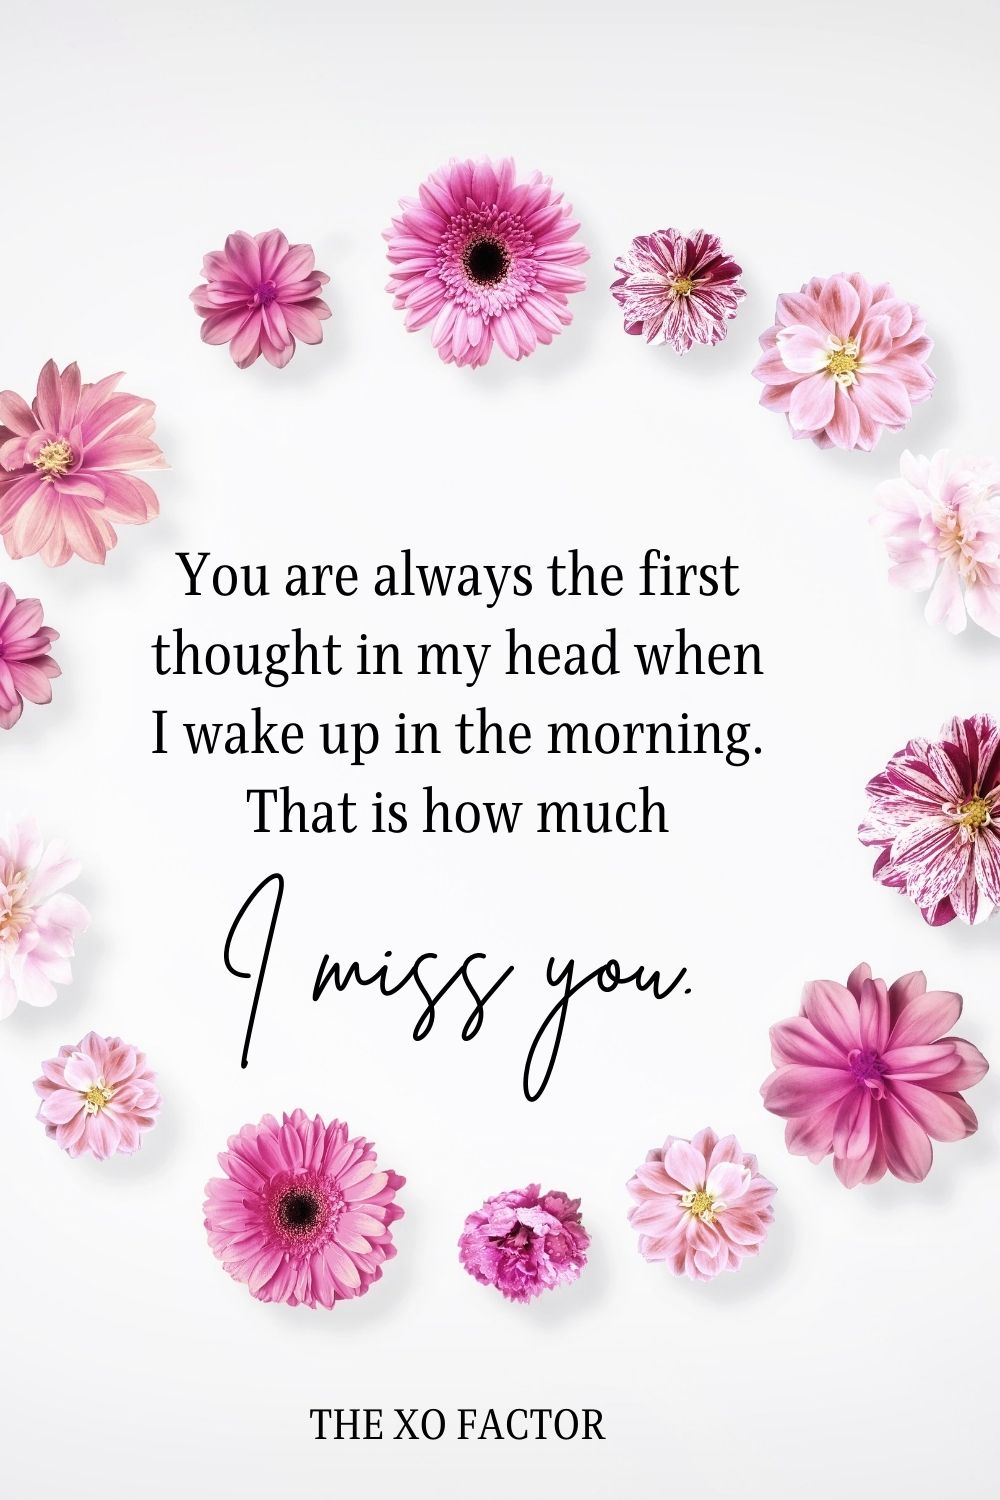 You are always the first thought in my head when I wake up in the morning. That is how much I miss you.